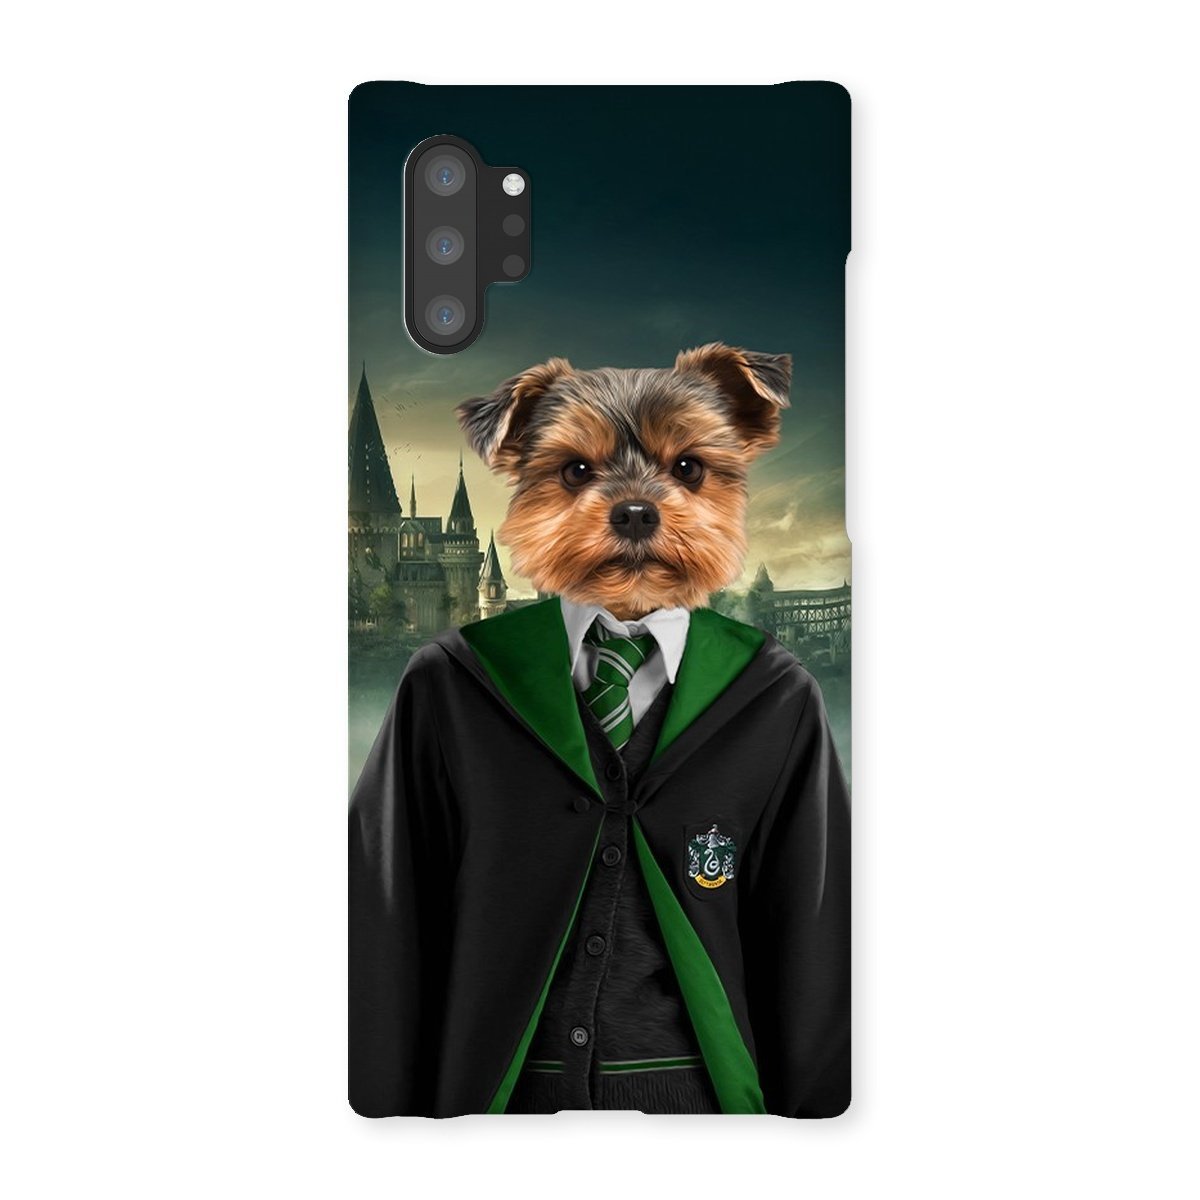 Slytherin (Harry Potter Inspired): Custom Pet Phone Case - Paw & Glory - paw and glory, pet portrait phone case, personalised cat phone case, phone case dog, puppy phone case, pet portrait phone case, personalised dog phone case uk, Pet Portraits phone case,